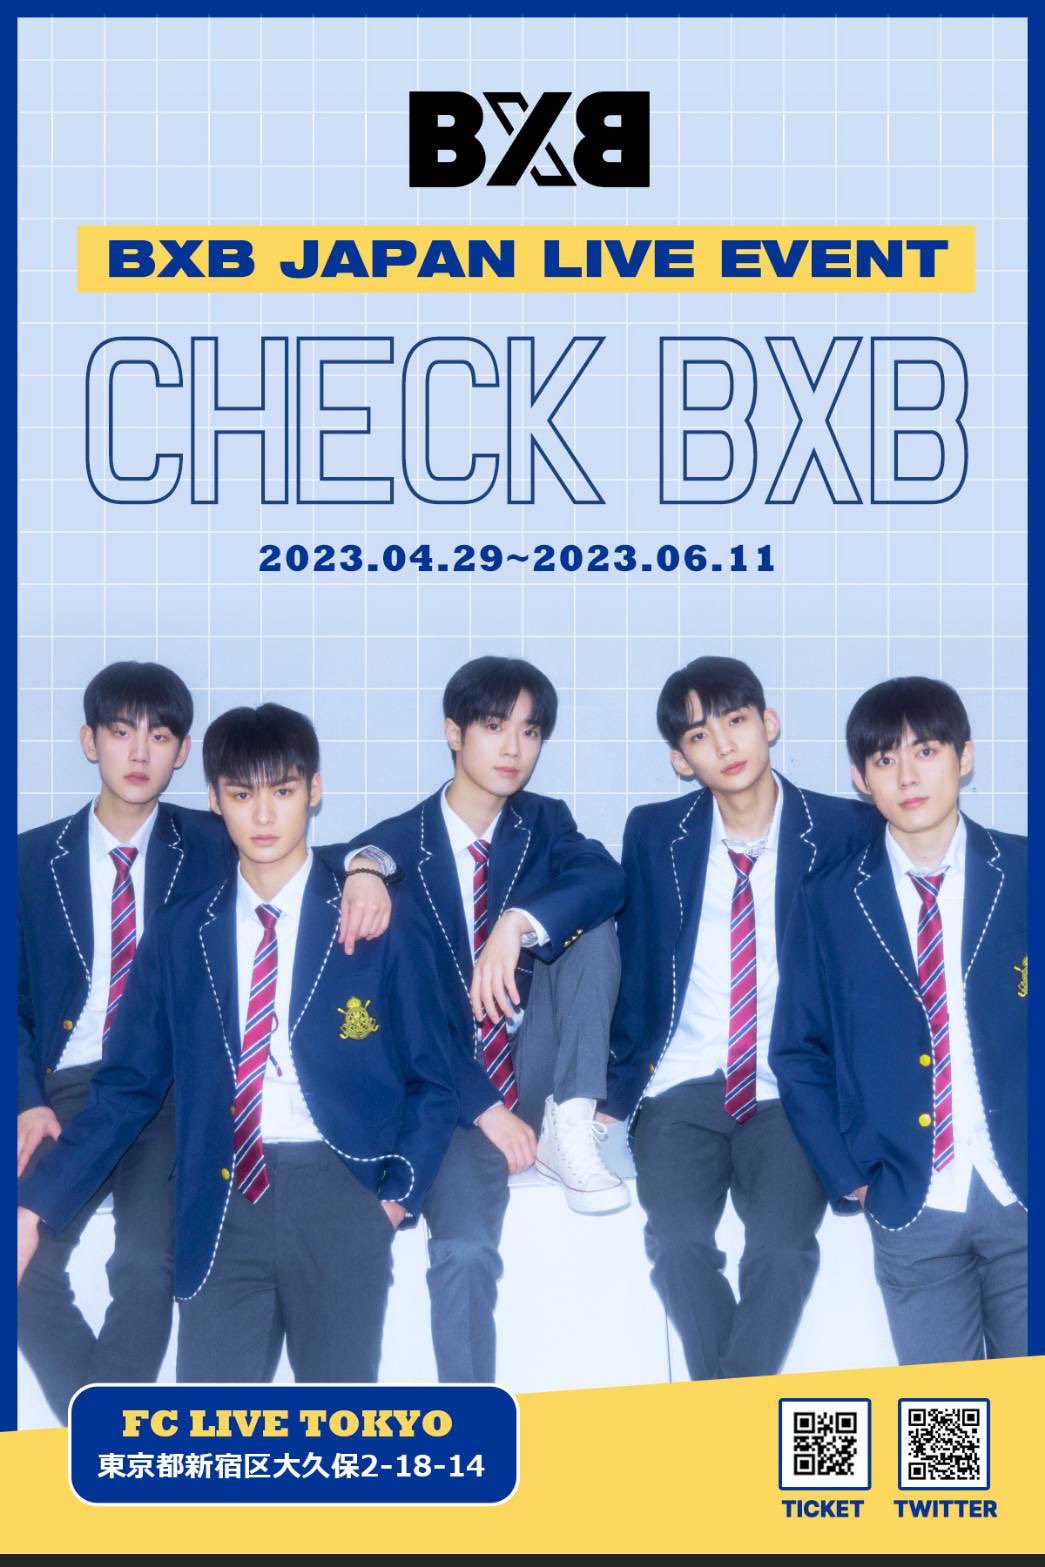 BXB JAPAN LIVE EVENT CHECK BXB ※無料イベント